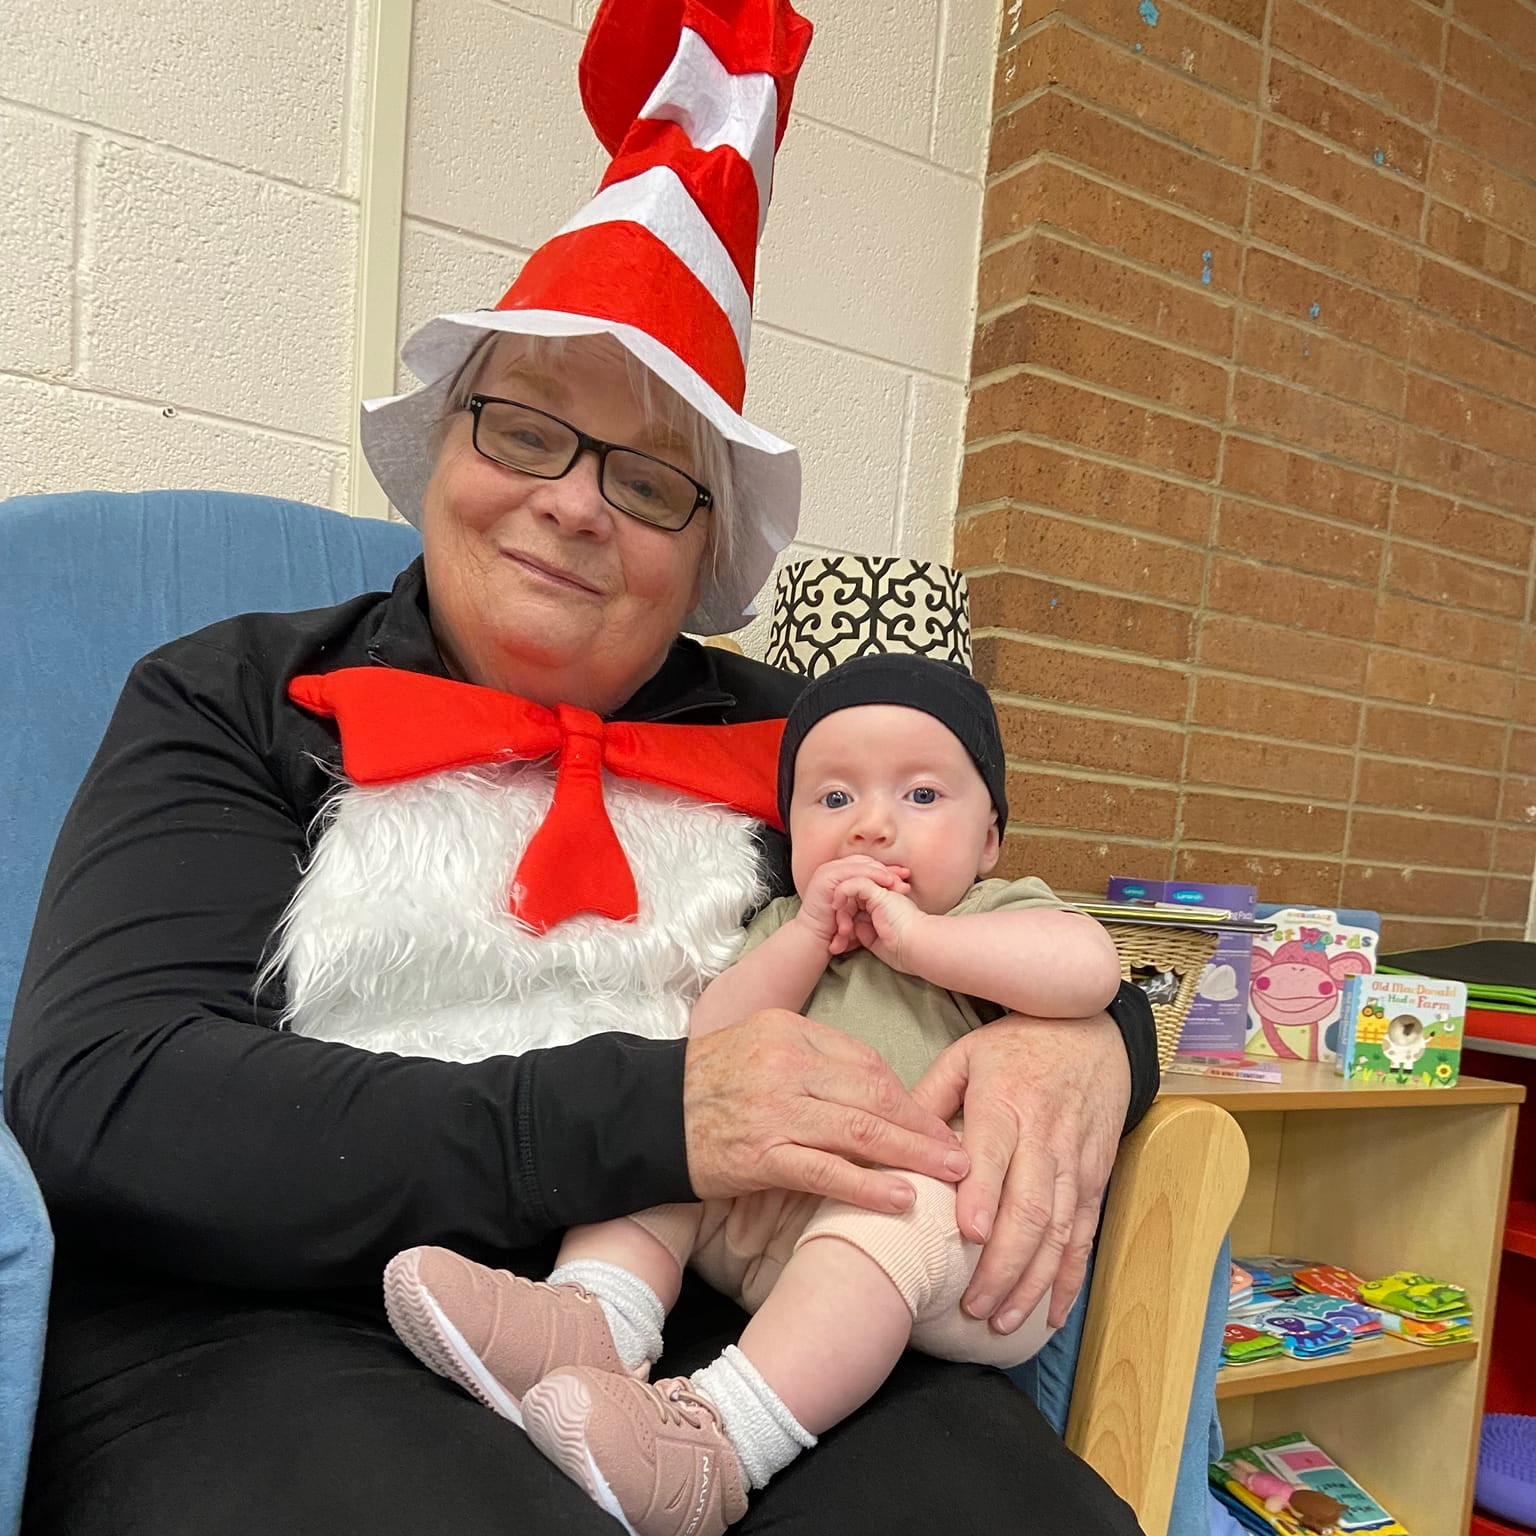 Teacher dressed up like Dr. Seuss holding a Birth to 3 baby